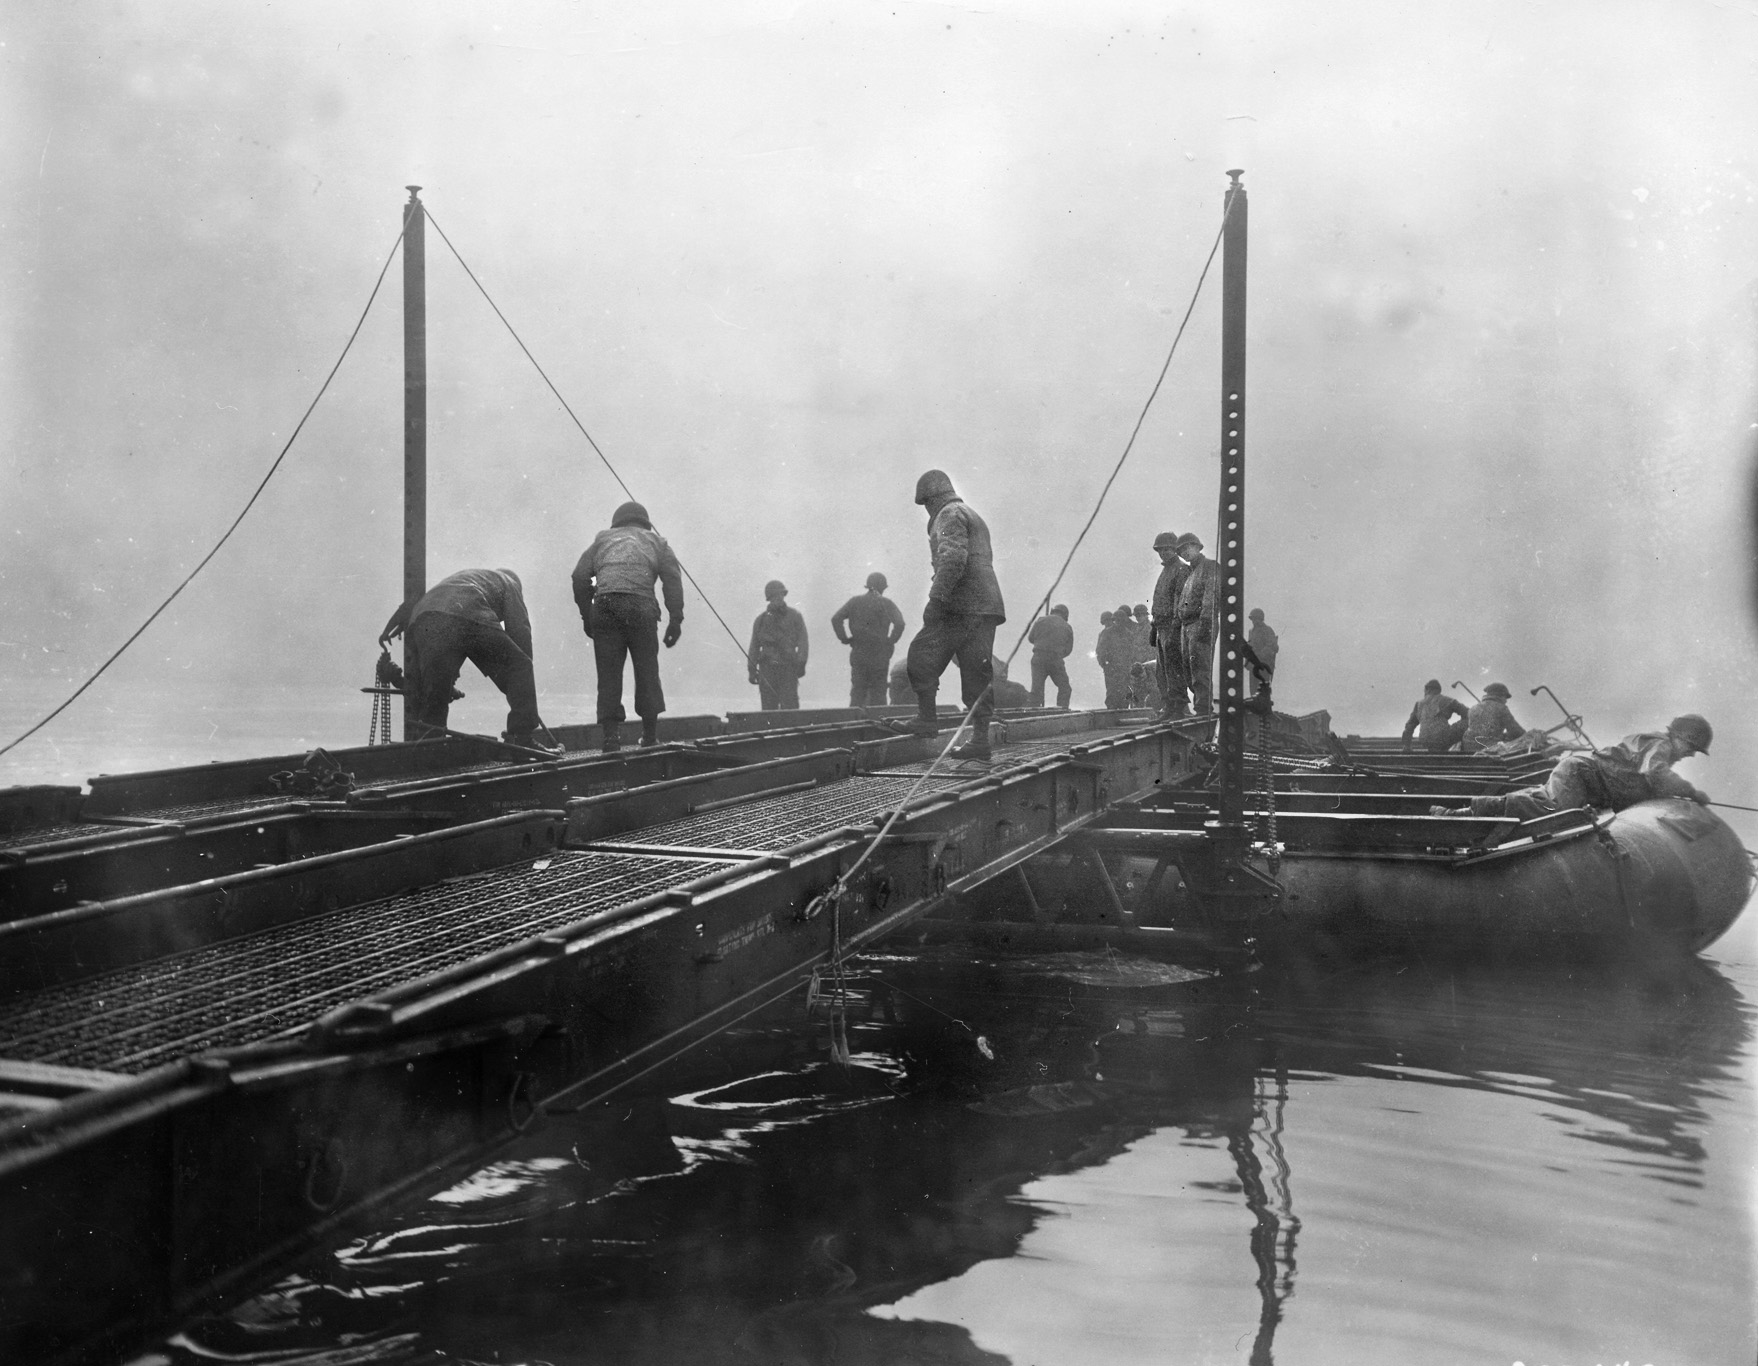 U.S. Army engineers attached to the 90th Infantry Division piece together a Treadway bridge across a German River. When a Messerschmitt fighter plane destroyed a bridge across the Werra River, Private Bernie Sevel found himself stranded on the far side. 